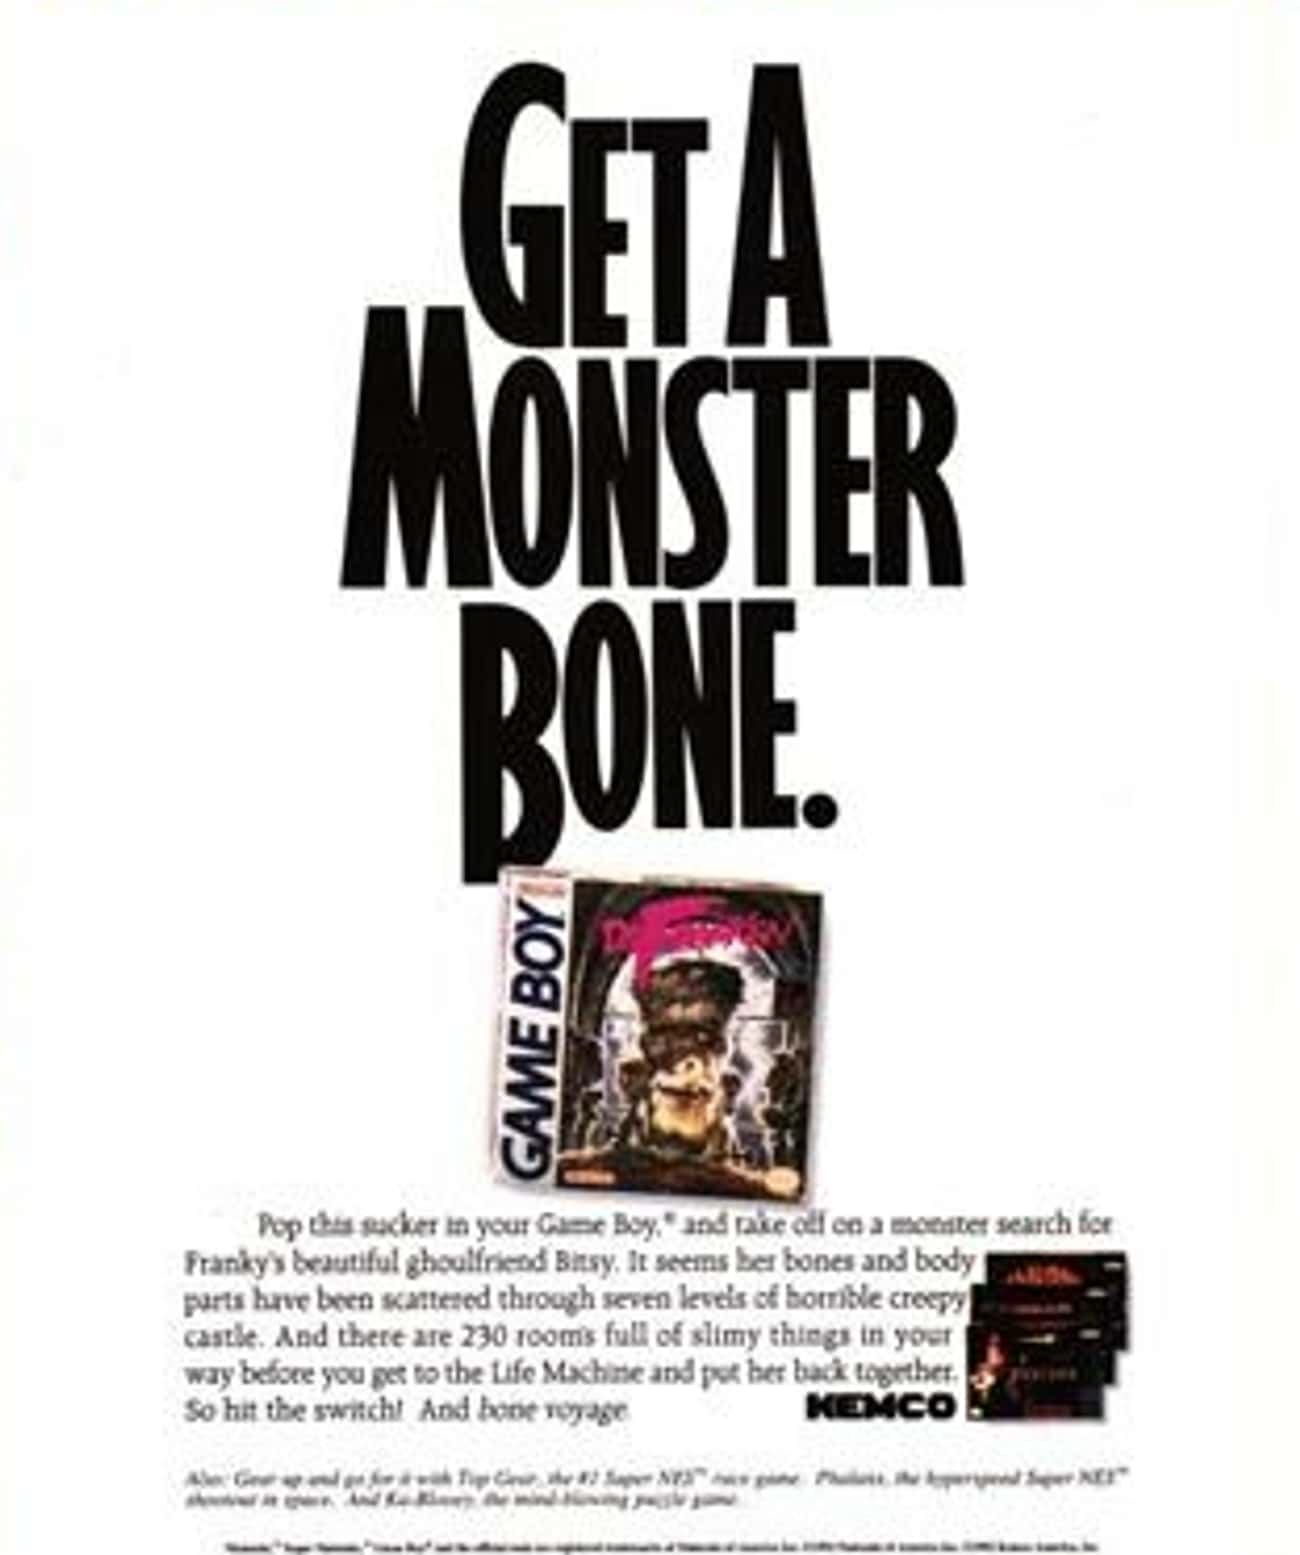 Vintage Gaming Ads - game boy - Geta Monster Bone Pop this sucker in your Game Boy, and take off on a monster search for Franky's beautiful ghoulfriend Bitsy. It seems her bones and body parts have been scattered through seven levels of horrible creepy ca